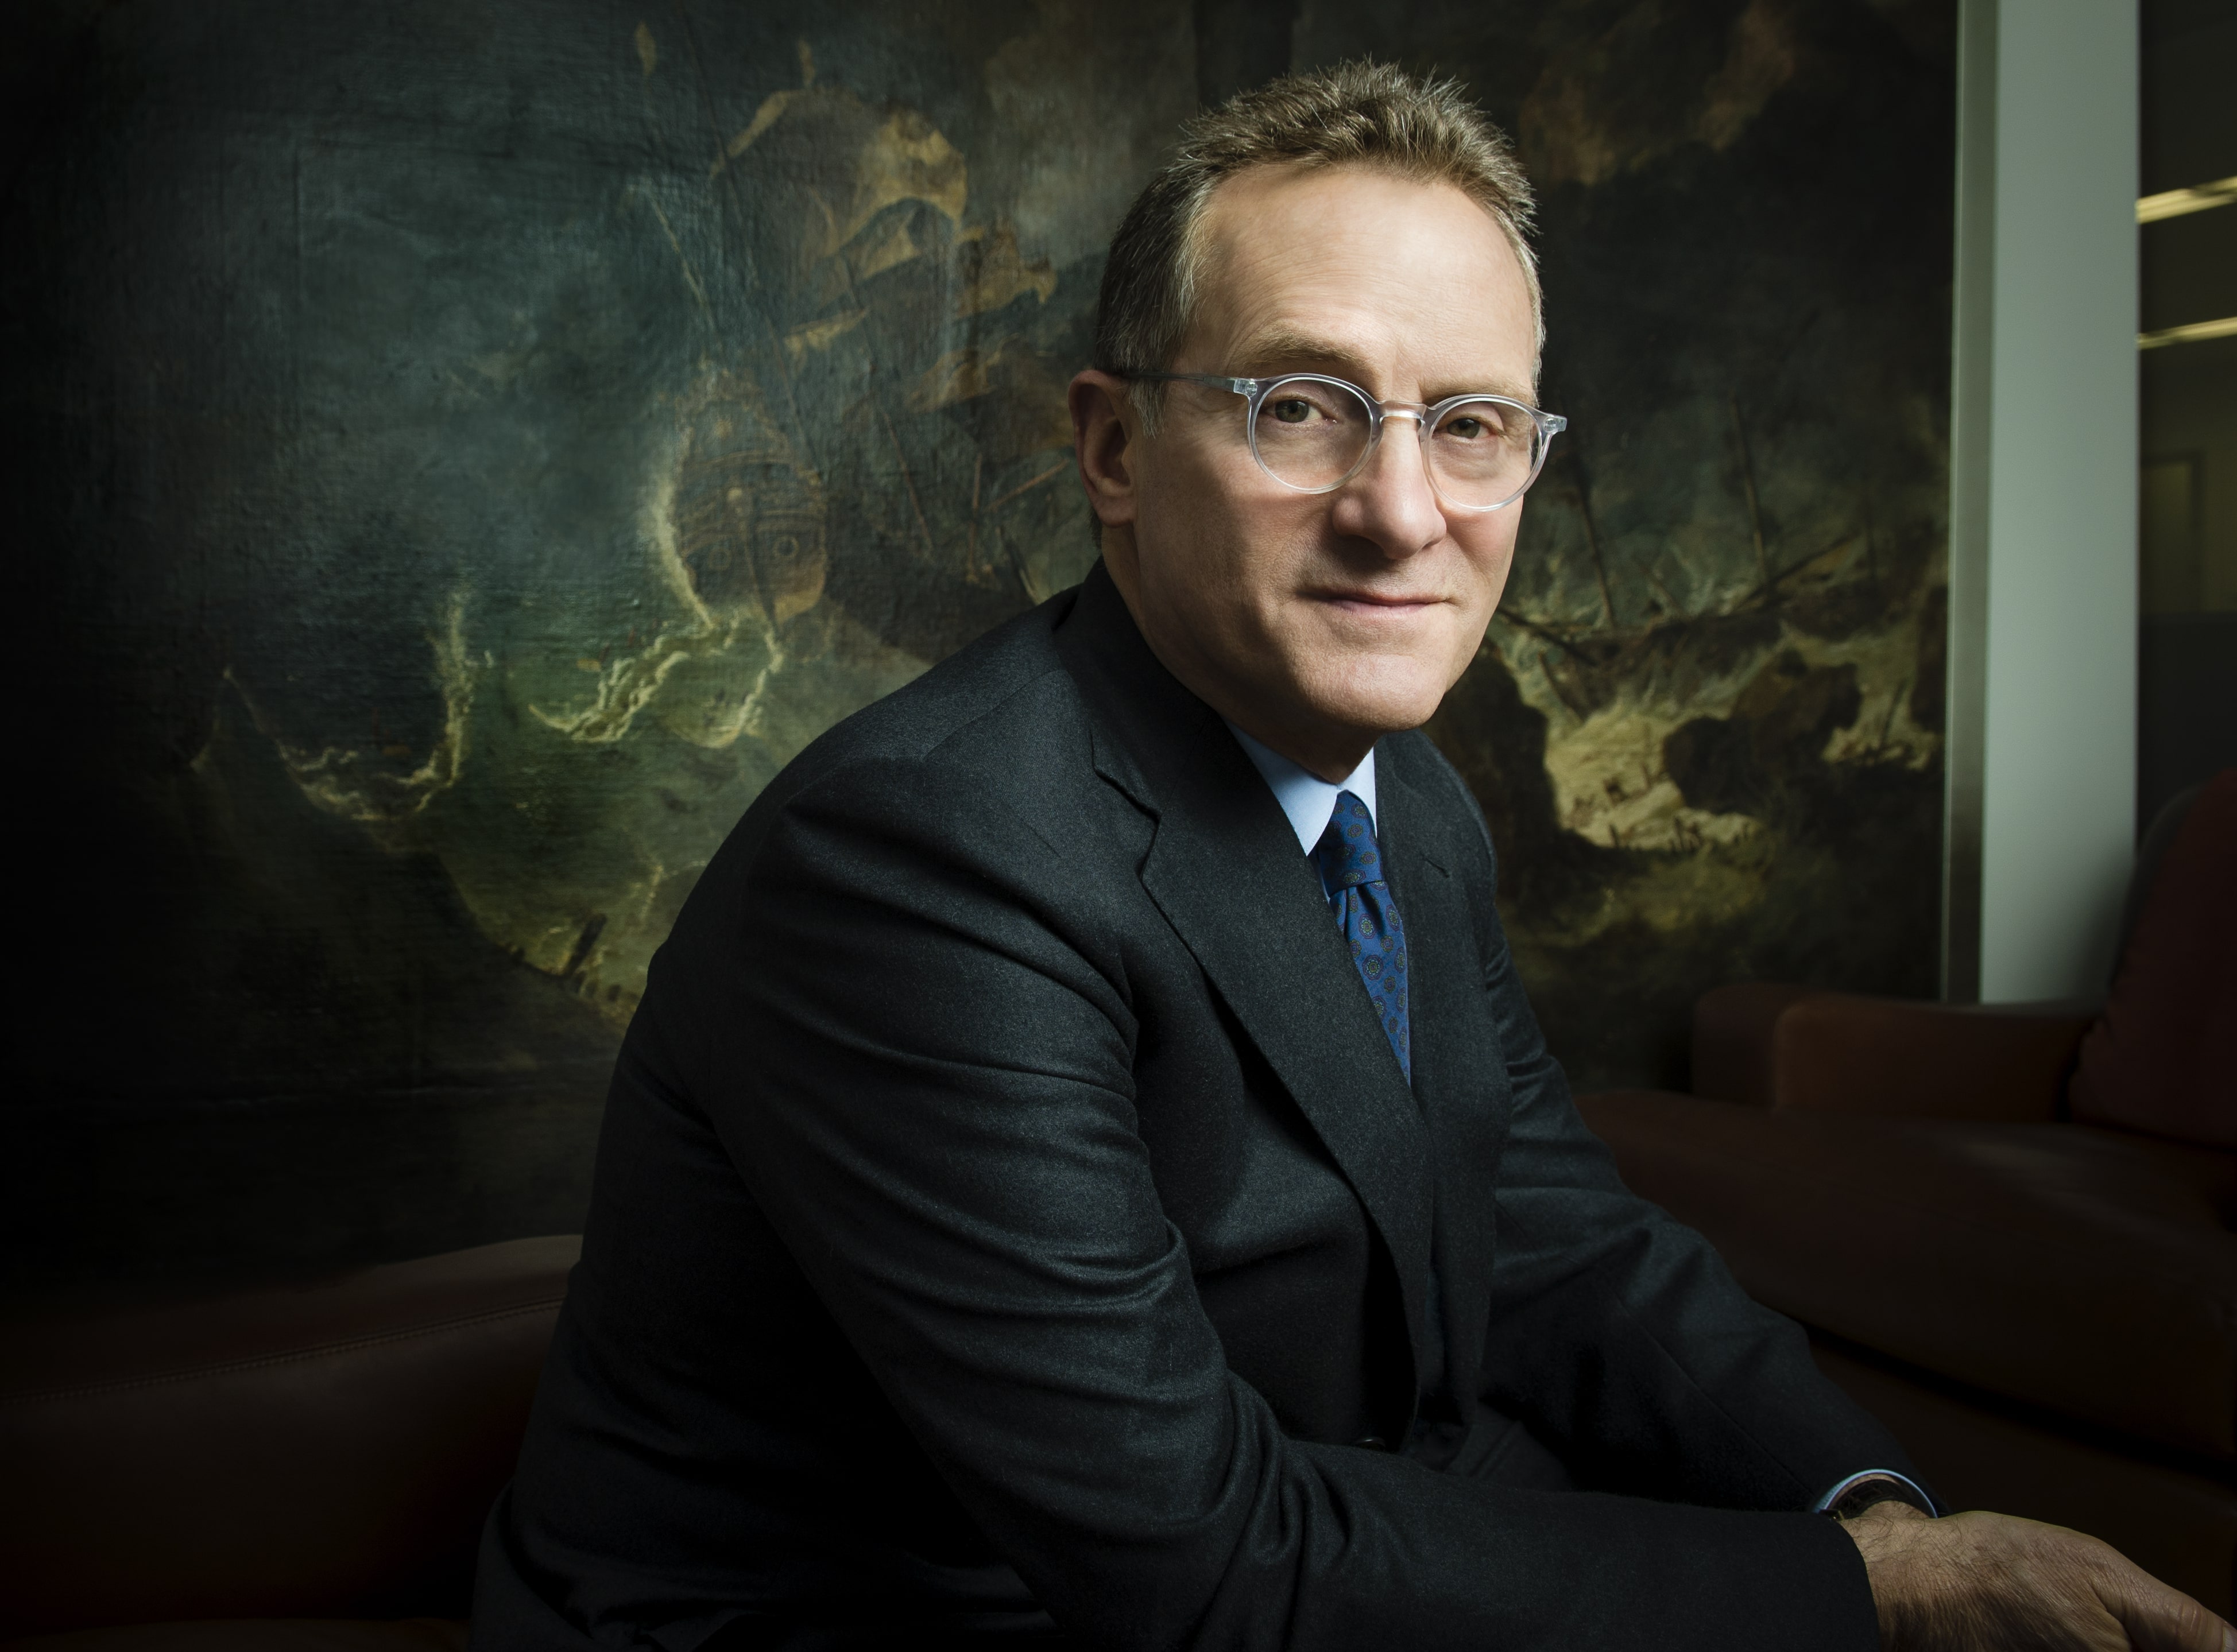 Howard Marks, co-founder and co-chairman of Oaktree Capital Management.